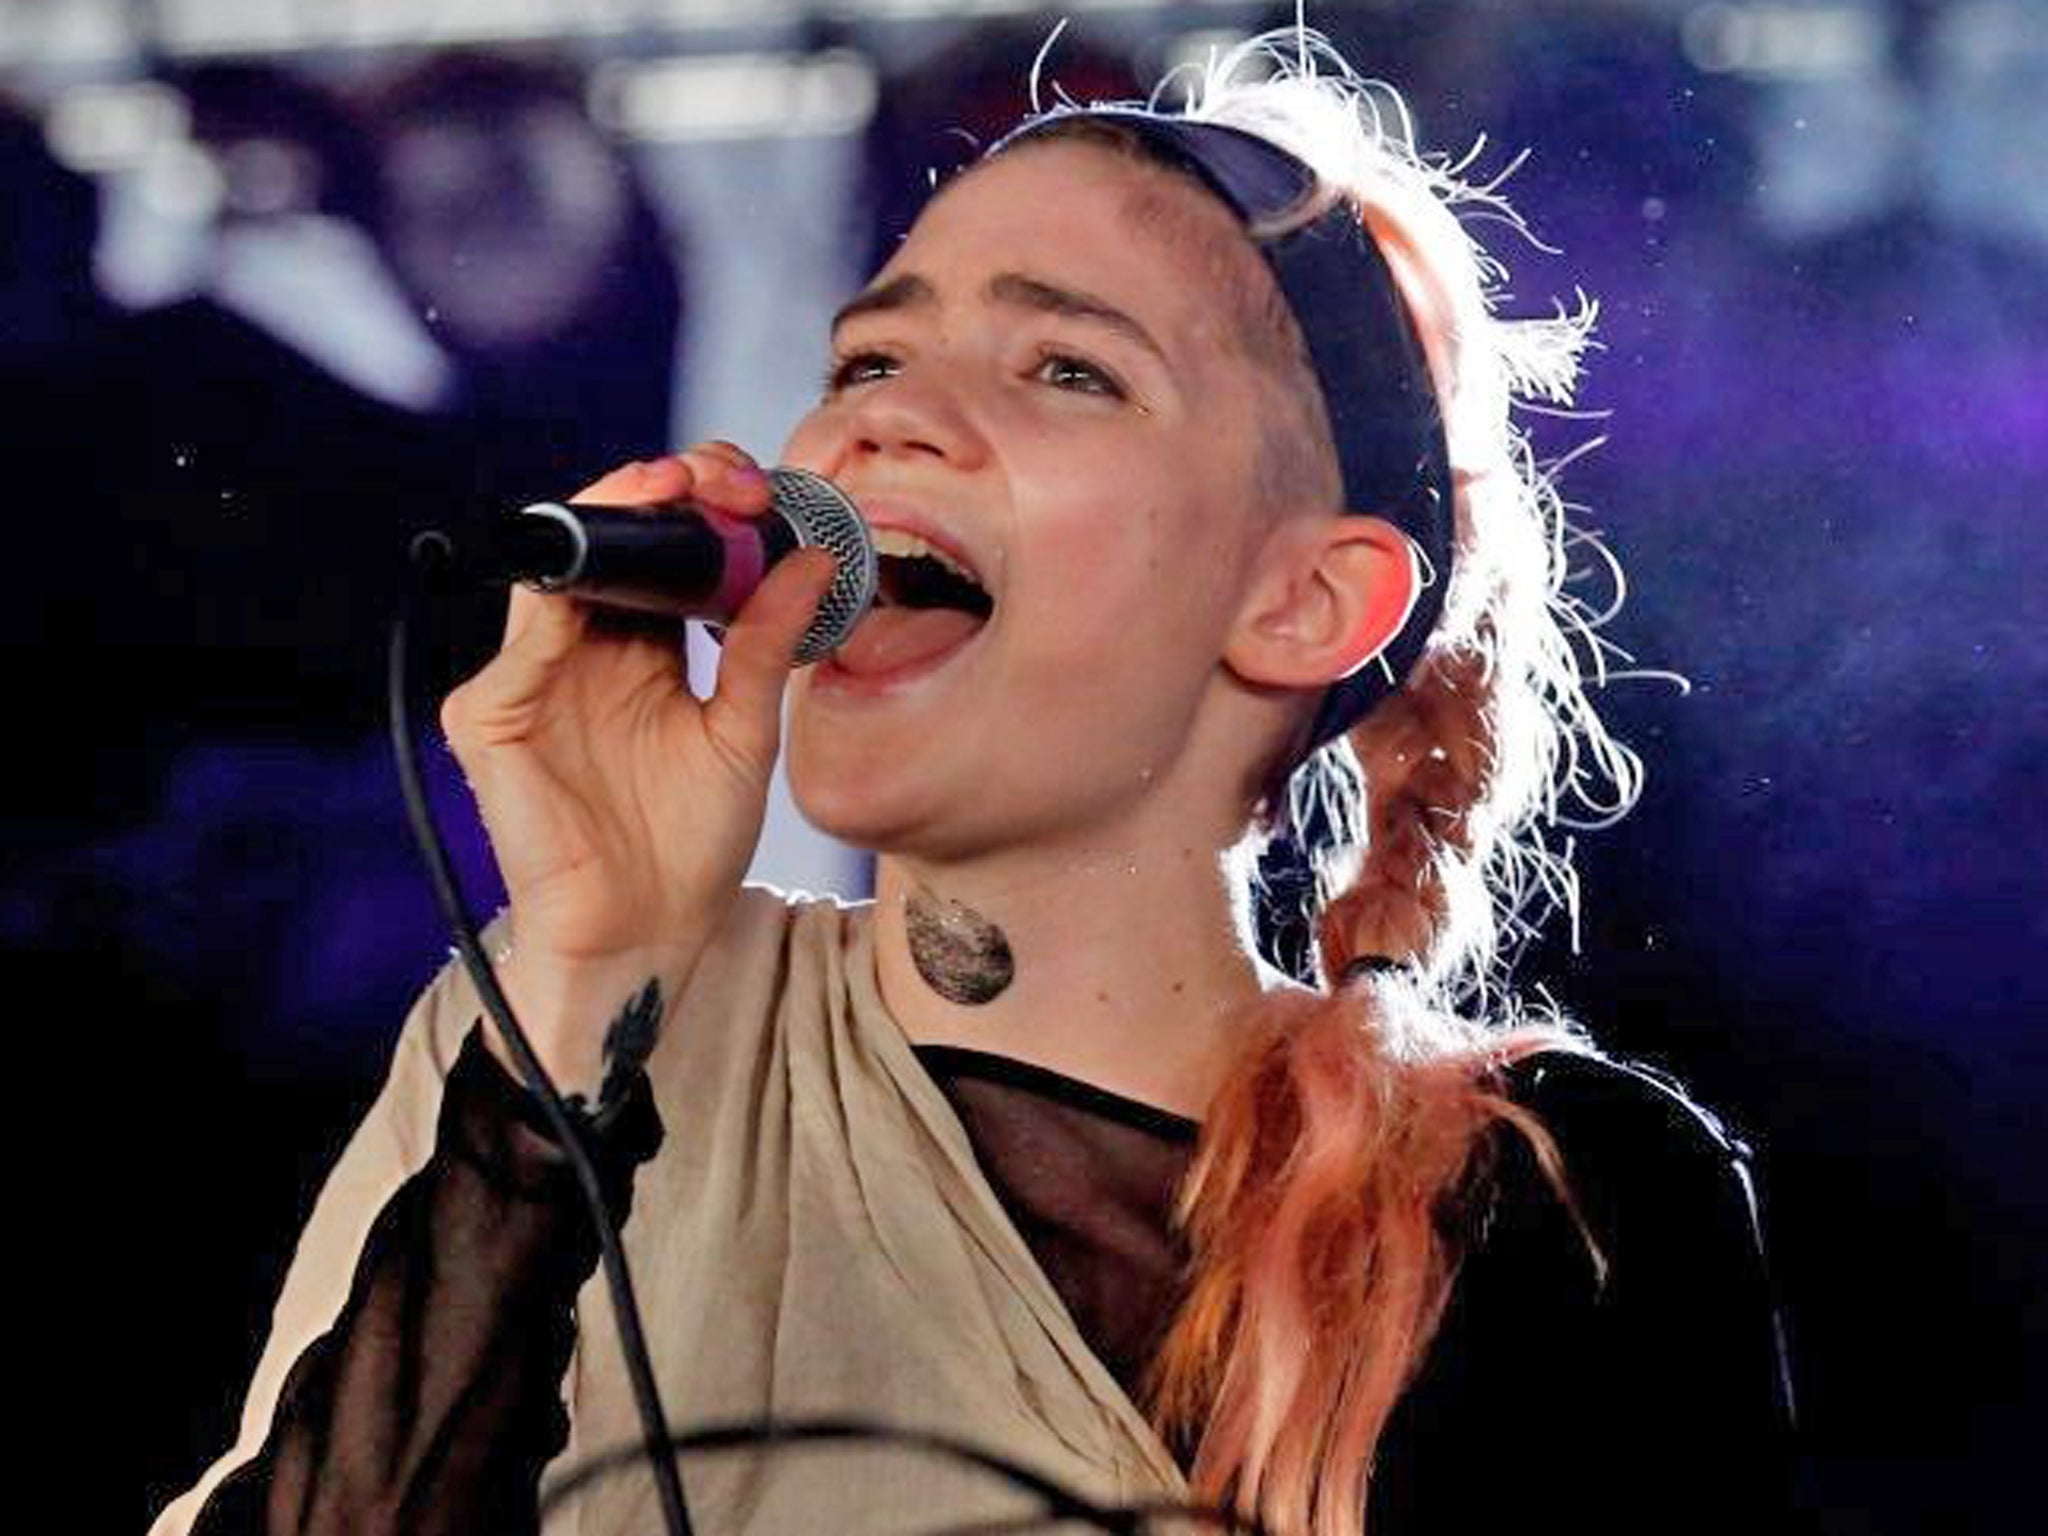 Grimes blogged about male chauvinism in the music industry